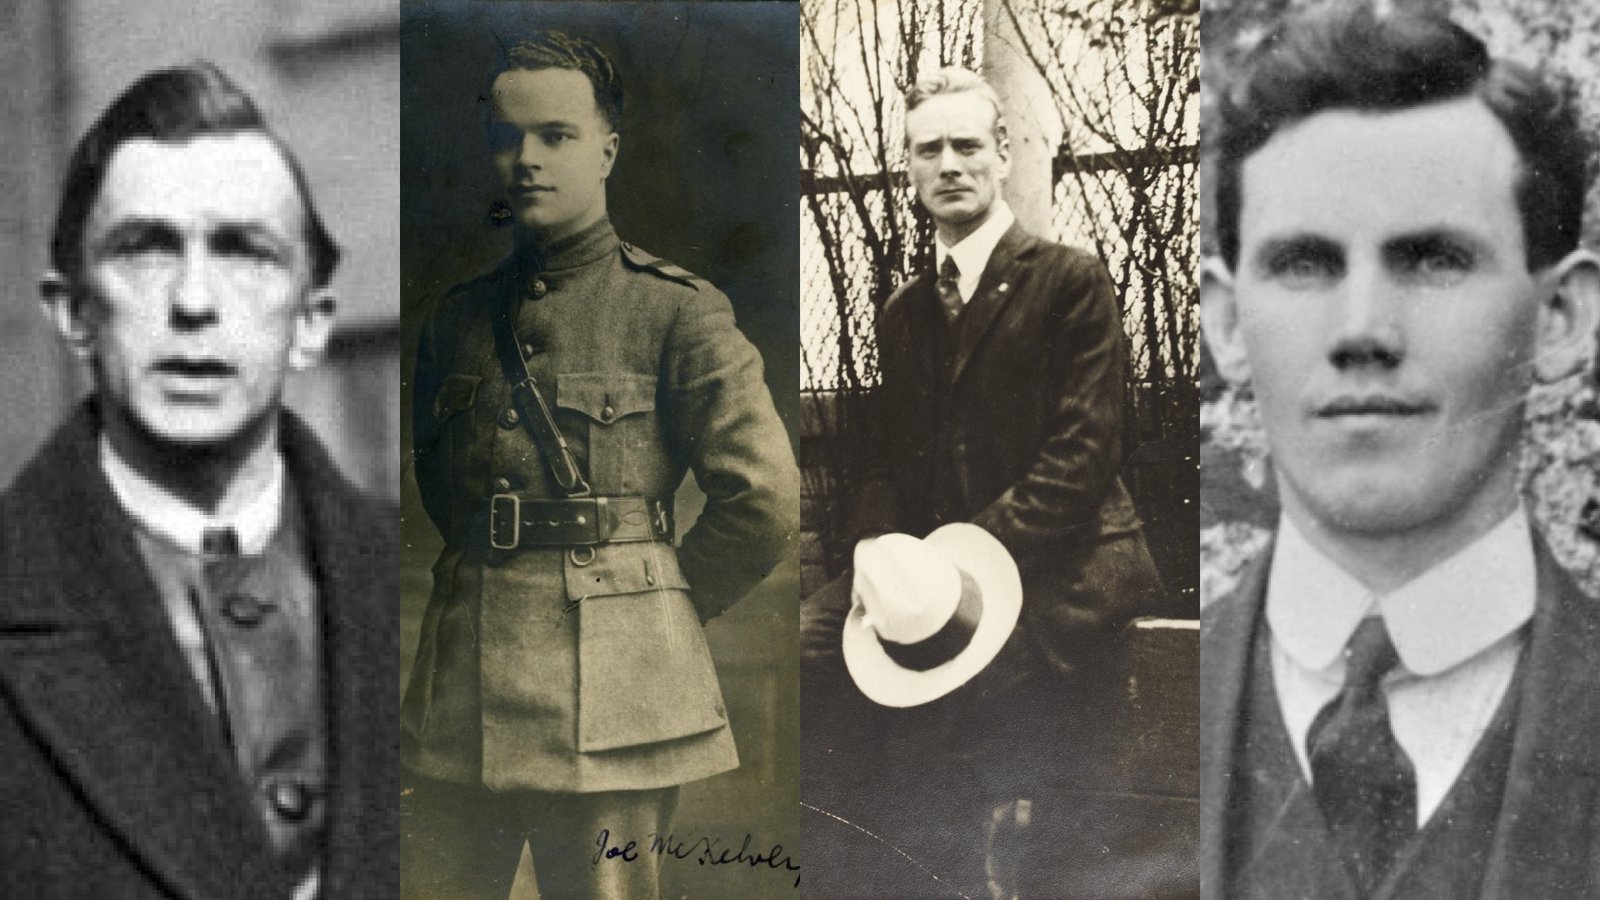 Image - MARKED FOR DEATH: Rory O'Connor, Joe McKelvey, Liam Mellows, and Richard Barret.

Credits: The National Library of Ireland, Military Archives, Getty Images, the Barret Family.